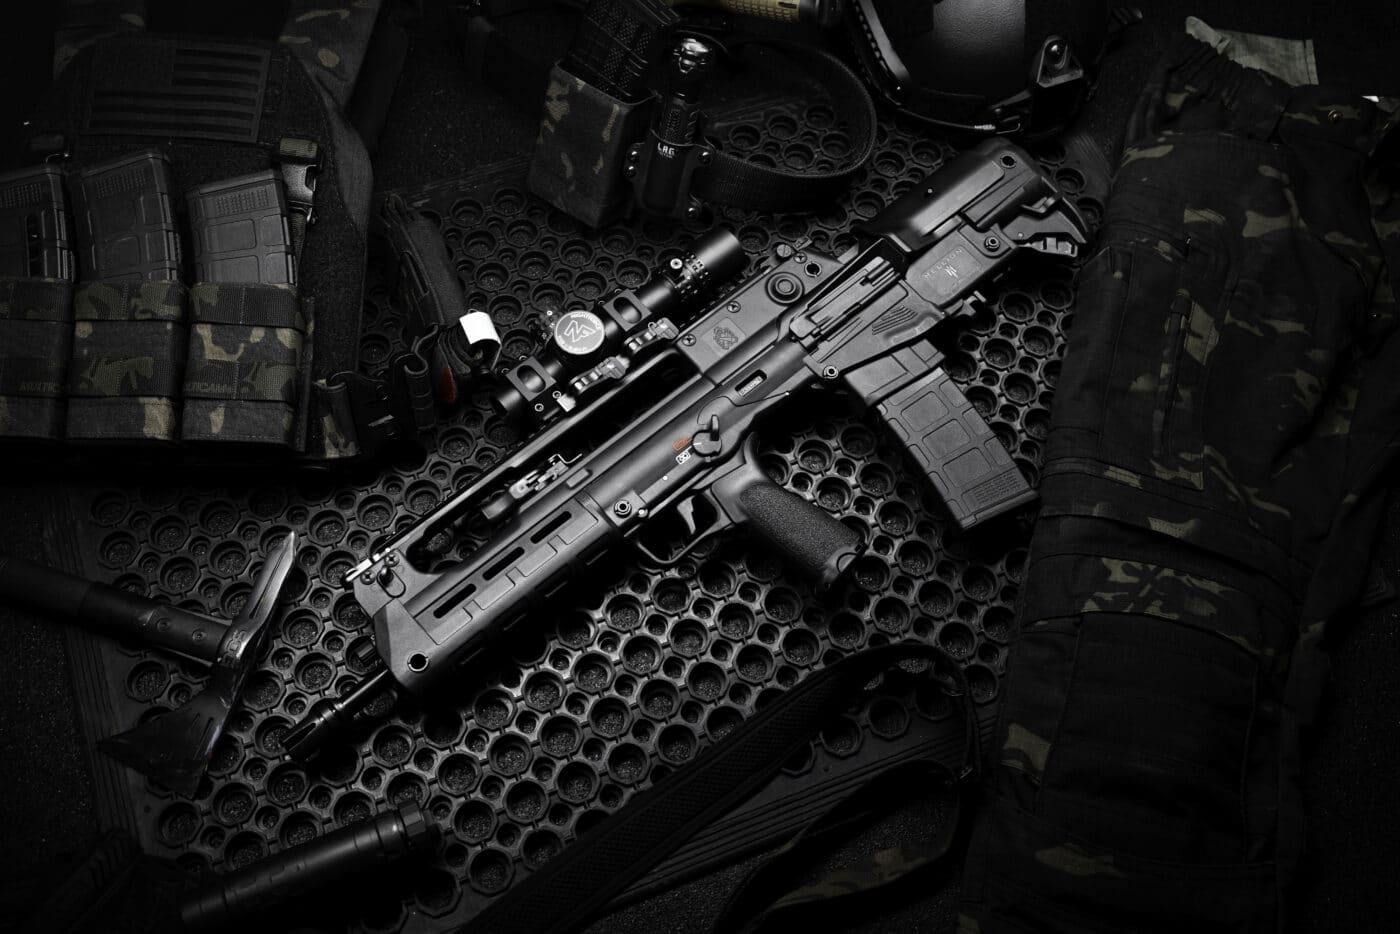 Springfield Armory Hellion side view with tactical gear